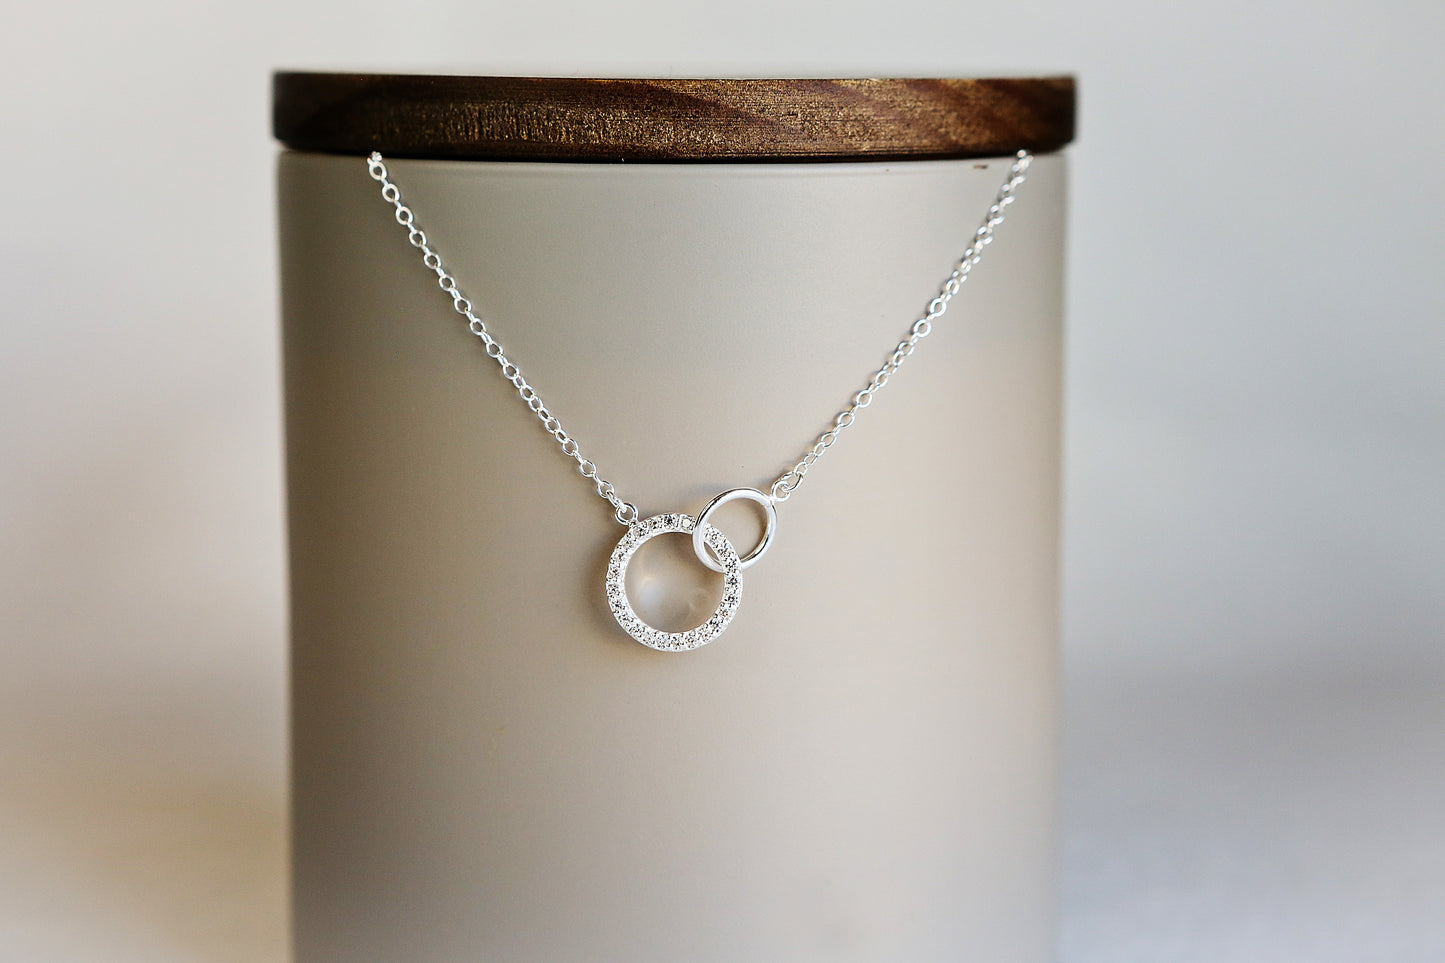 Necklace, Silver and Cubic Zirconia Infinity